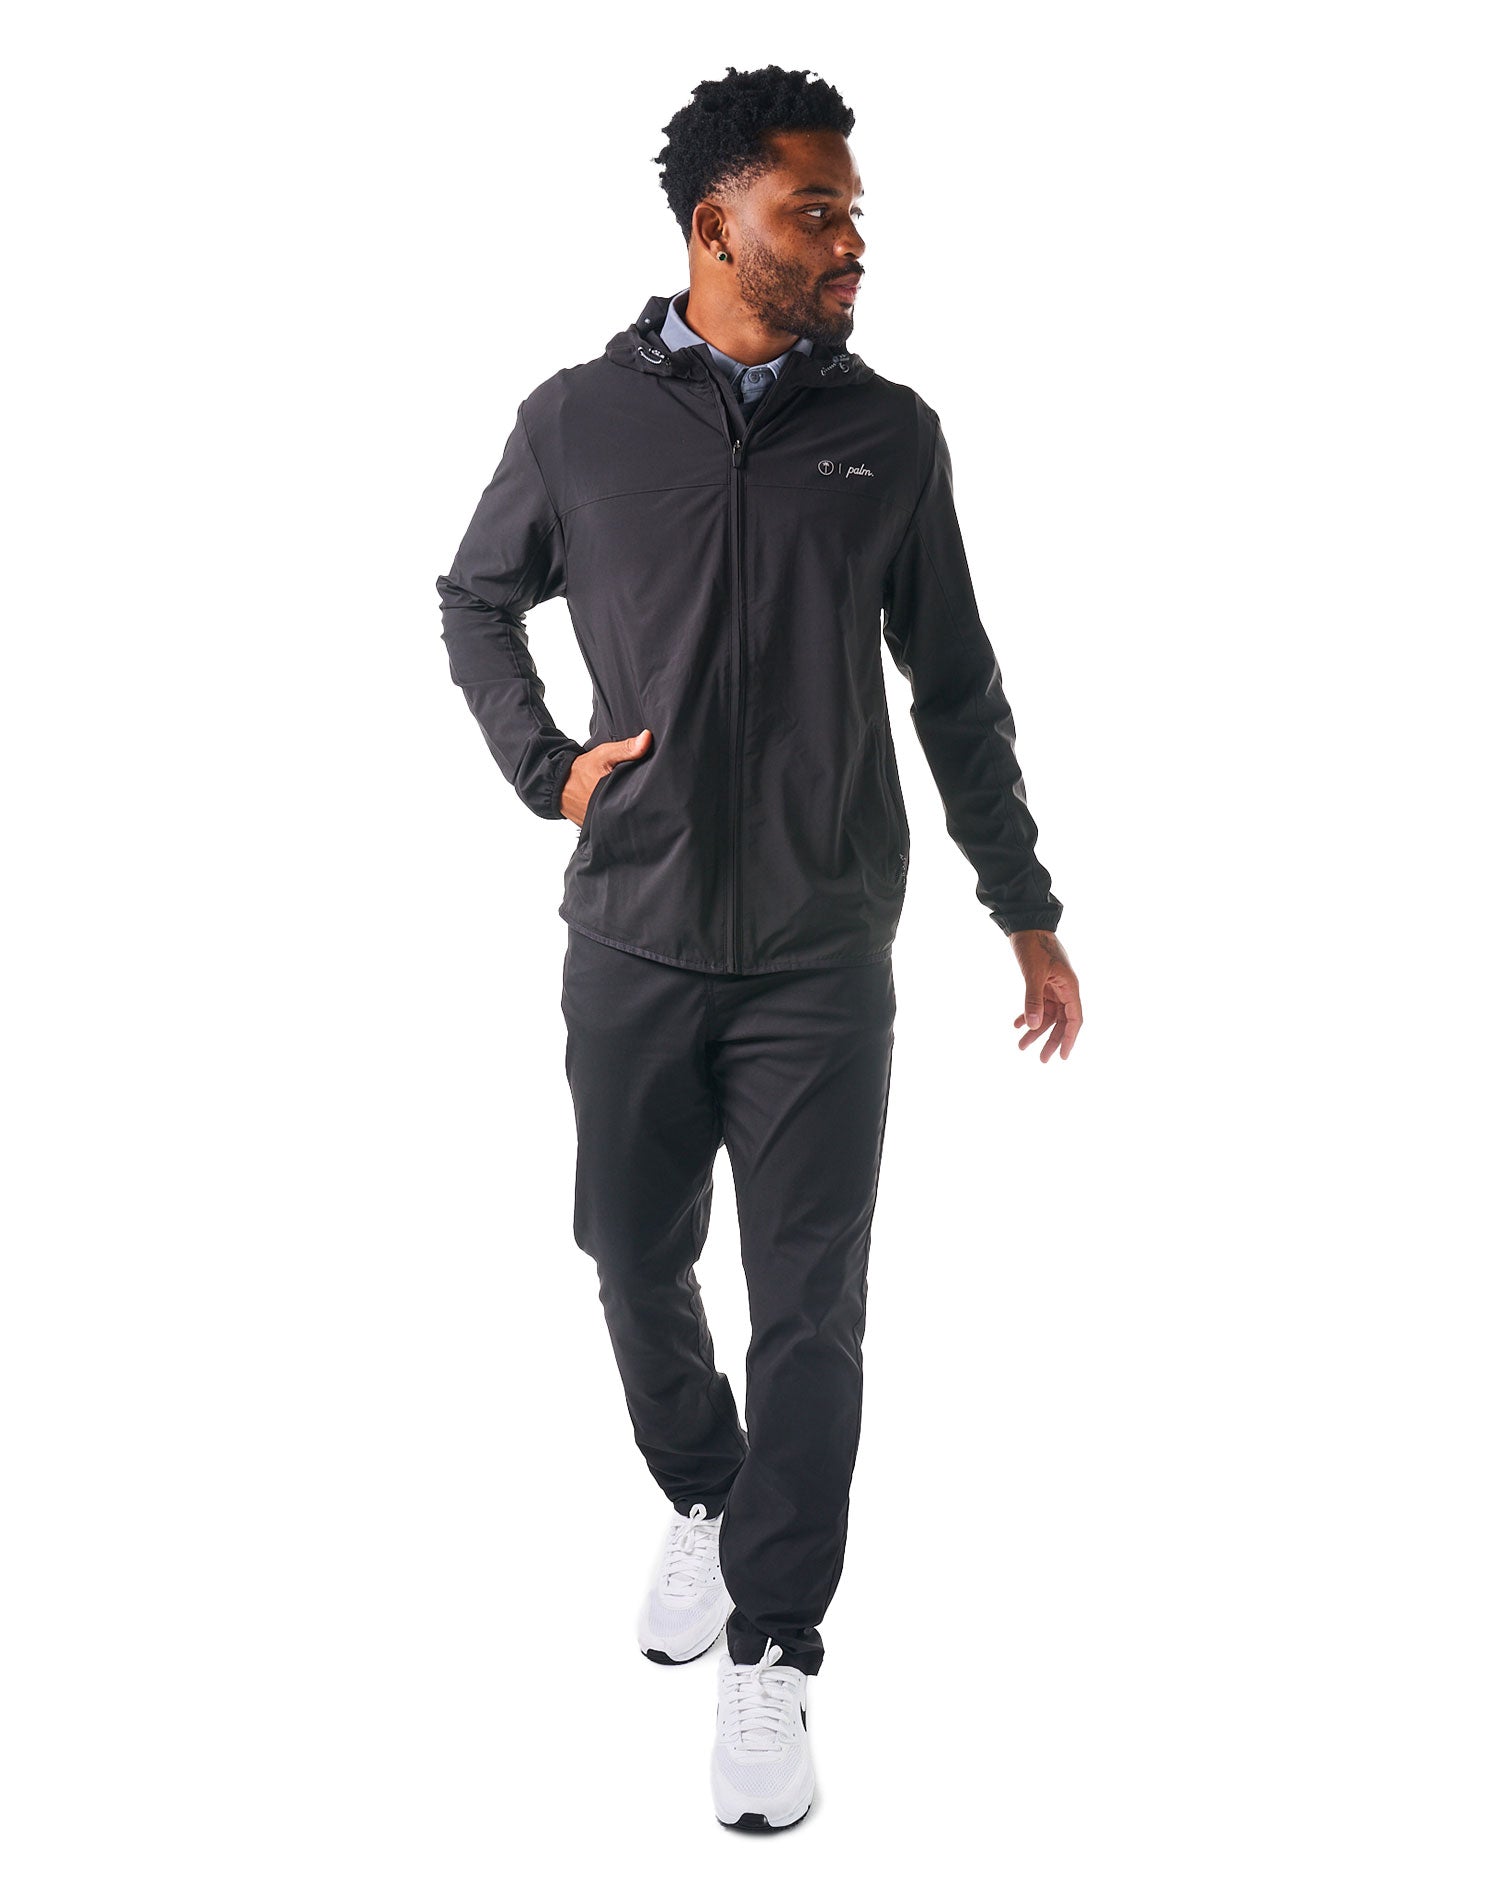 Palm Golf Co. Upgrade Performance Windbreaker - Tailored Fit